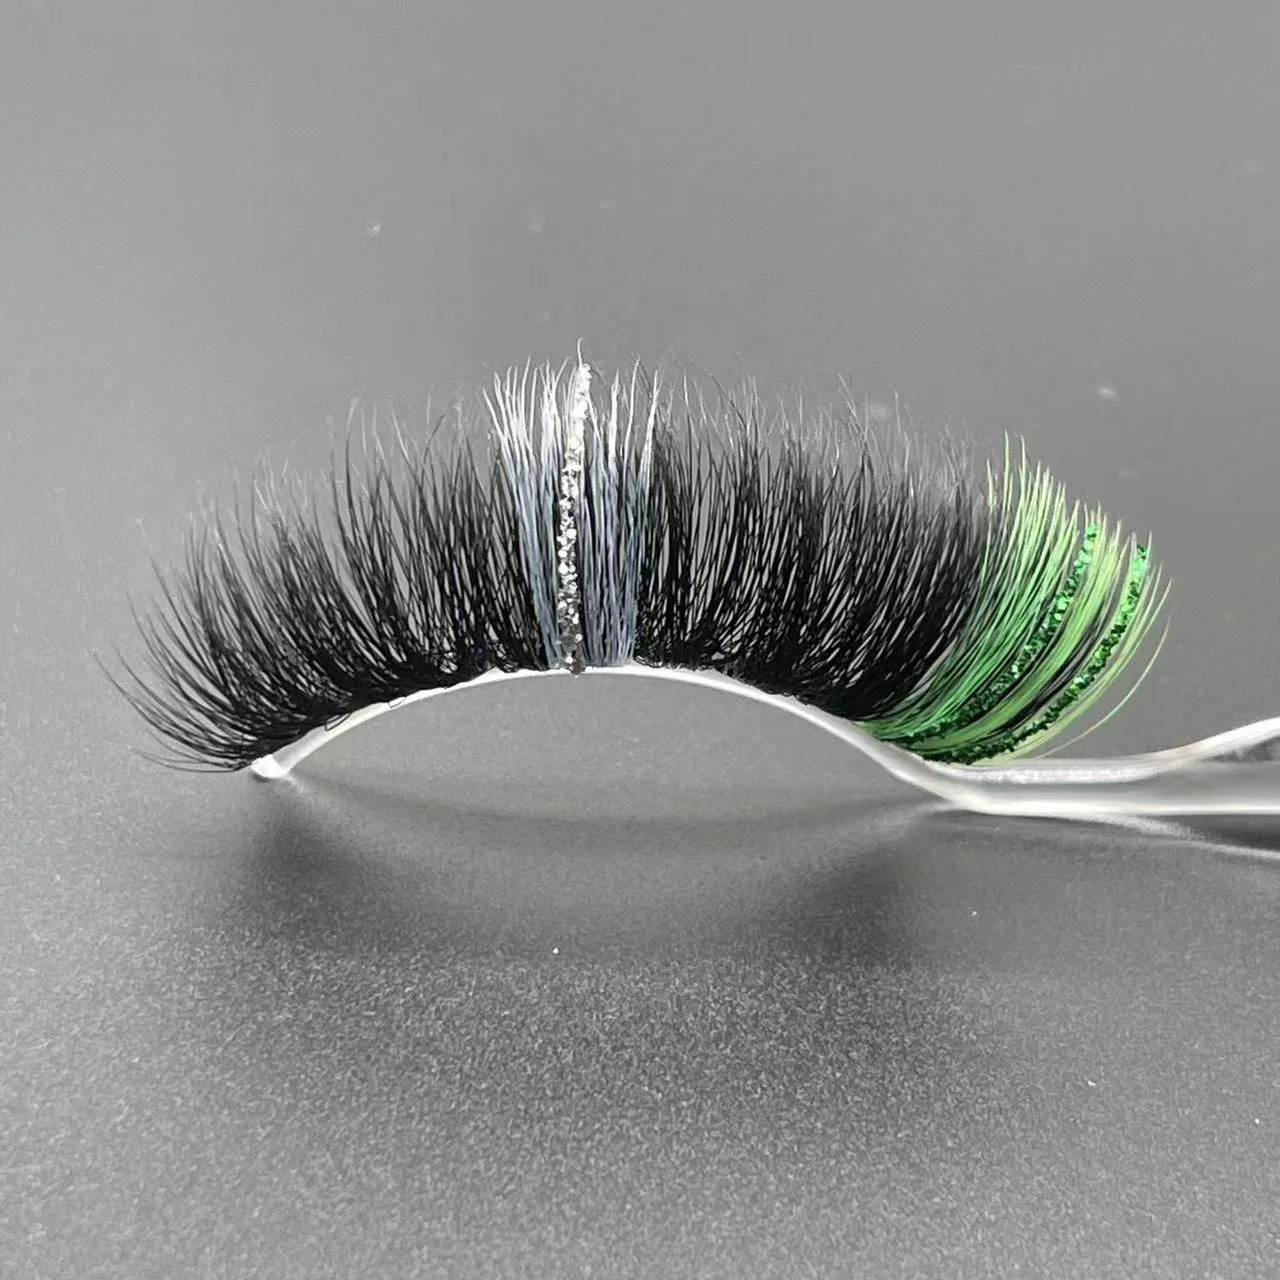 Hbzgtlad Colored Lashes Glitter Mink 15mm -20mm Fluffy Color Streaks Cosplay Makeup Beauty Eyelashes -Outlet Maid Outfit Store S809879d528a242aaa8d69a82ed893991z.jpg